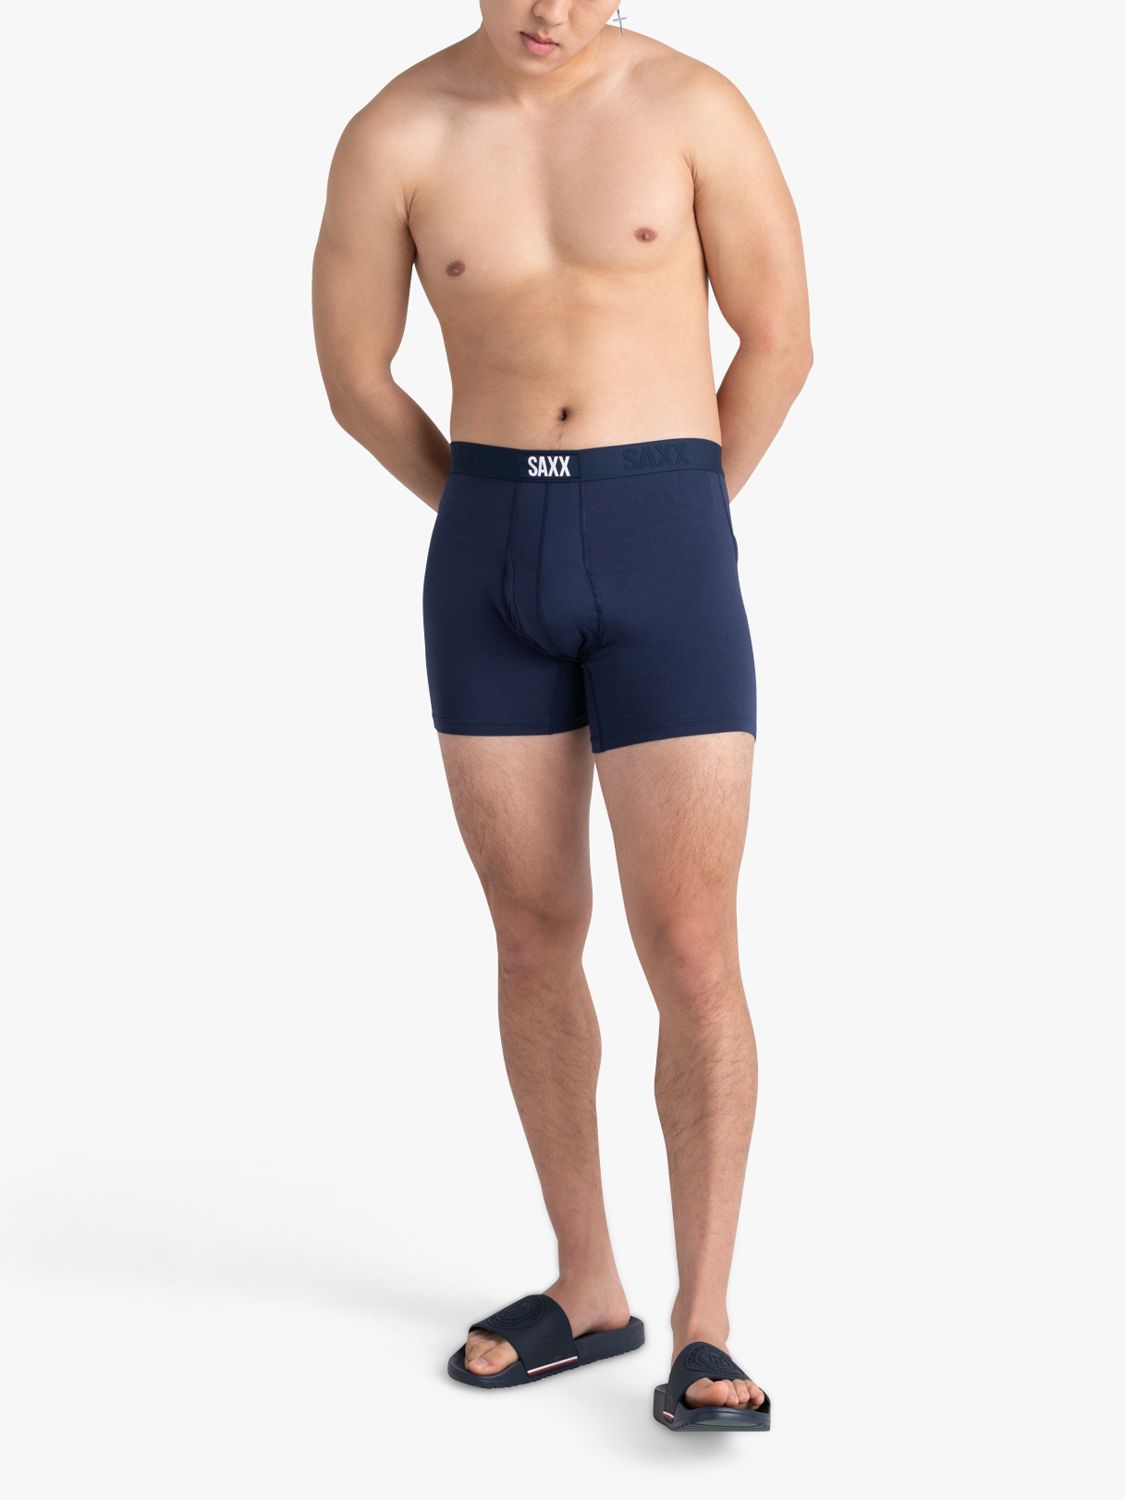 SAXX Ultra Relaxed Fit Trunks, Pack of 2, Black/Navy, S